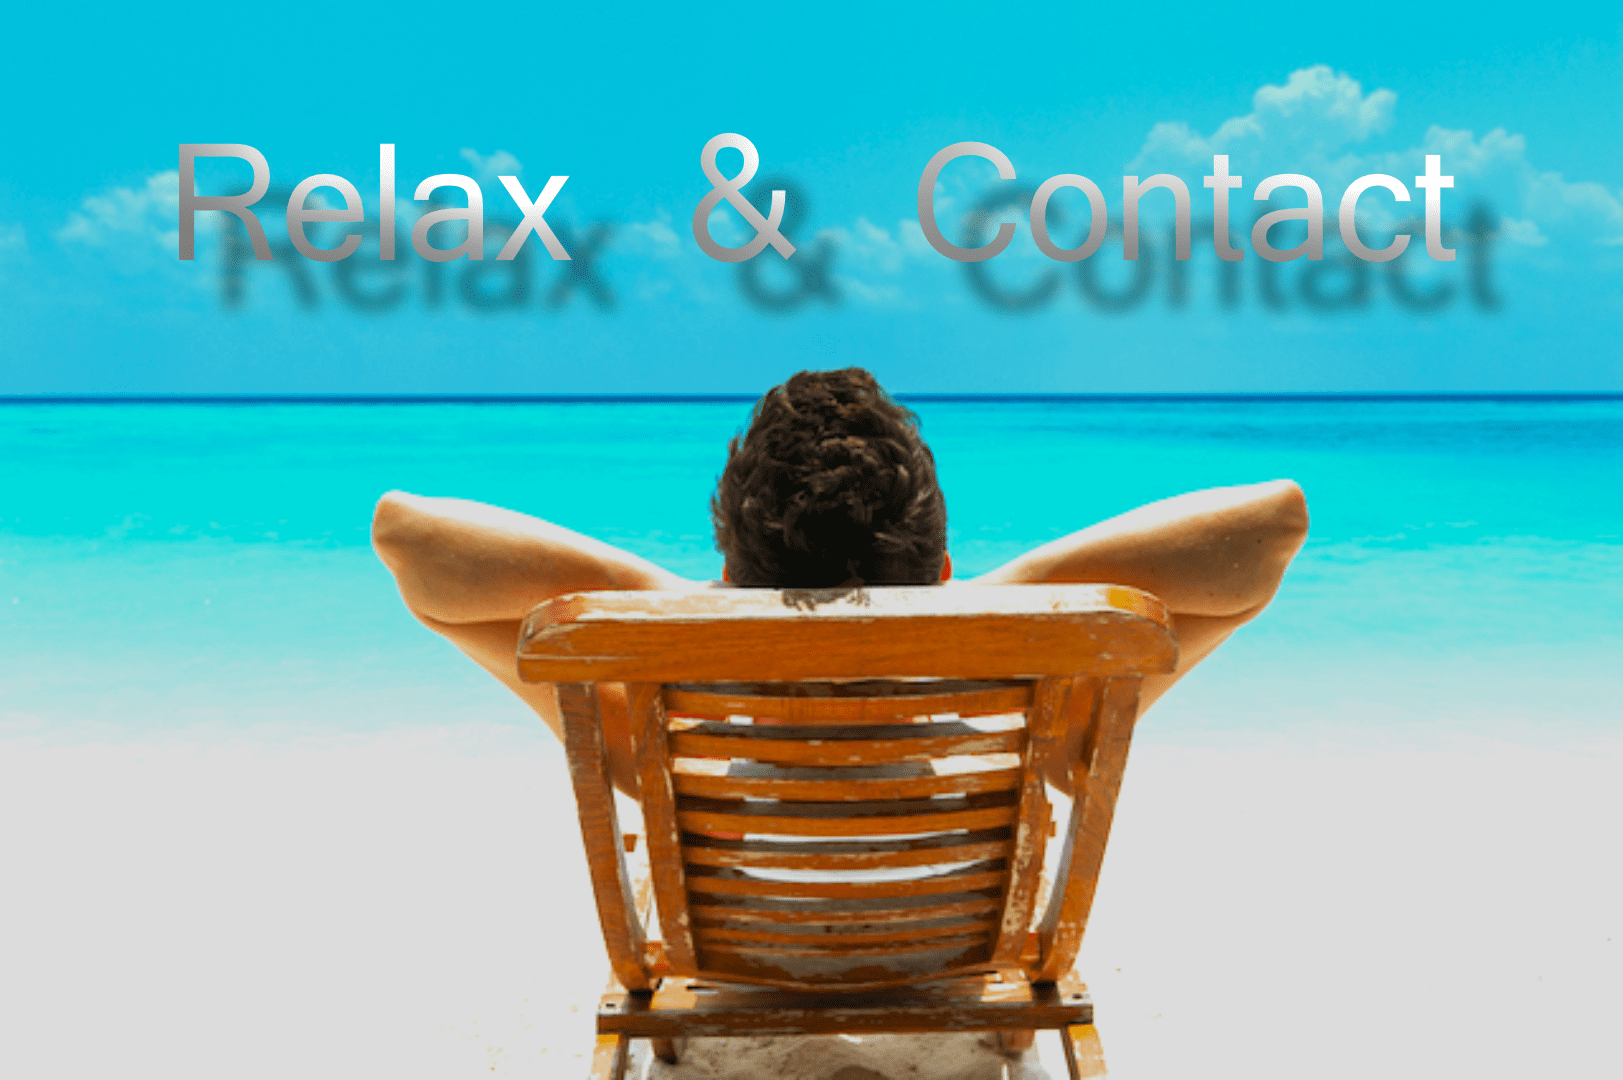 relax & contact